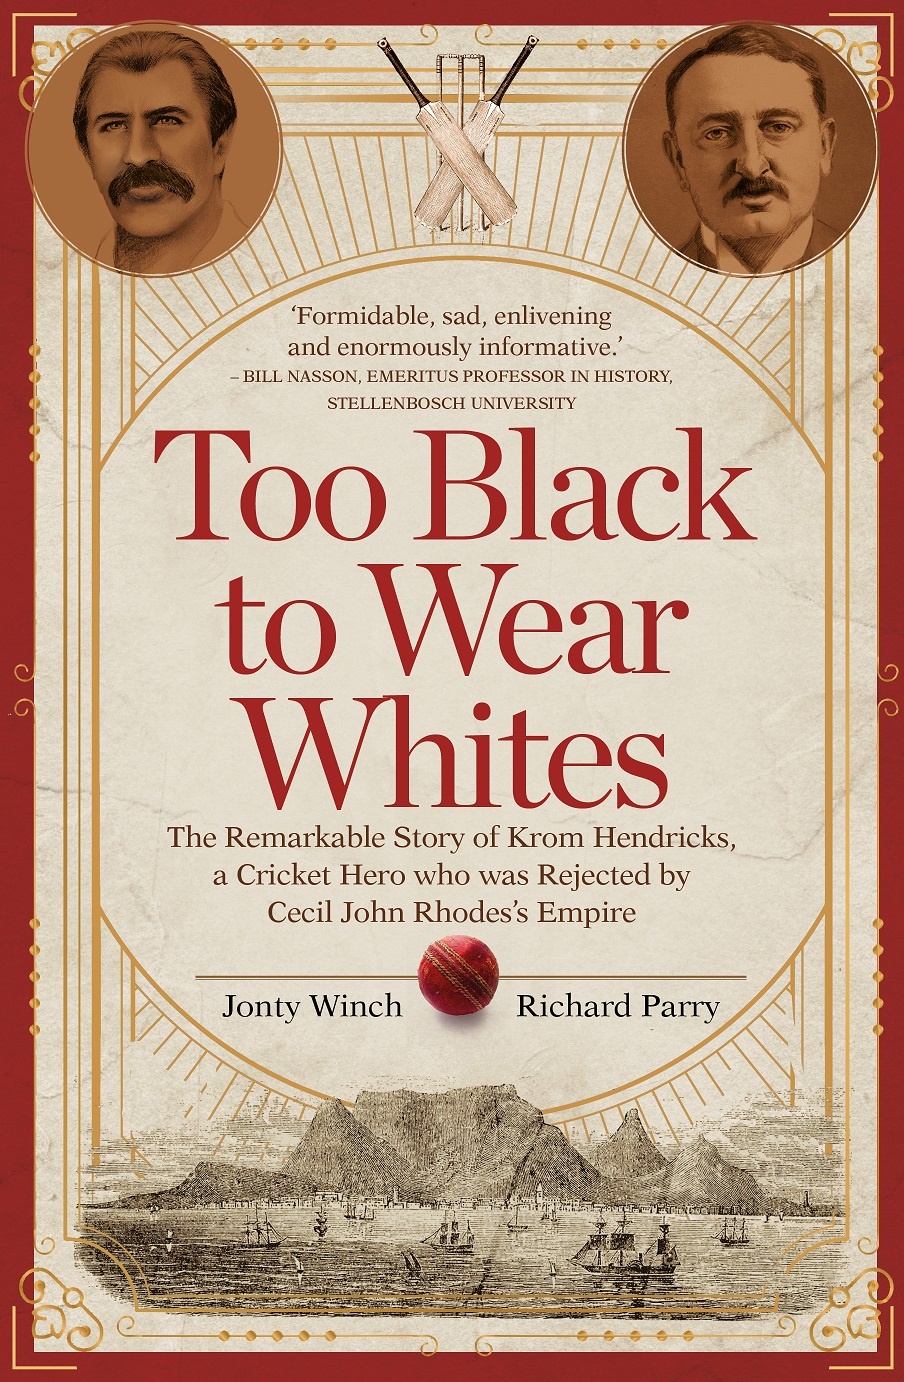 Too Black to Wear Whites by Jonty Winch and Richard Parry. (Penguin Random House South Africa)